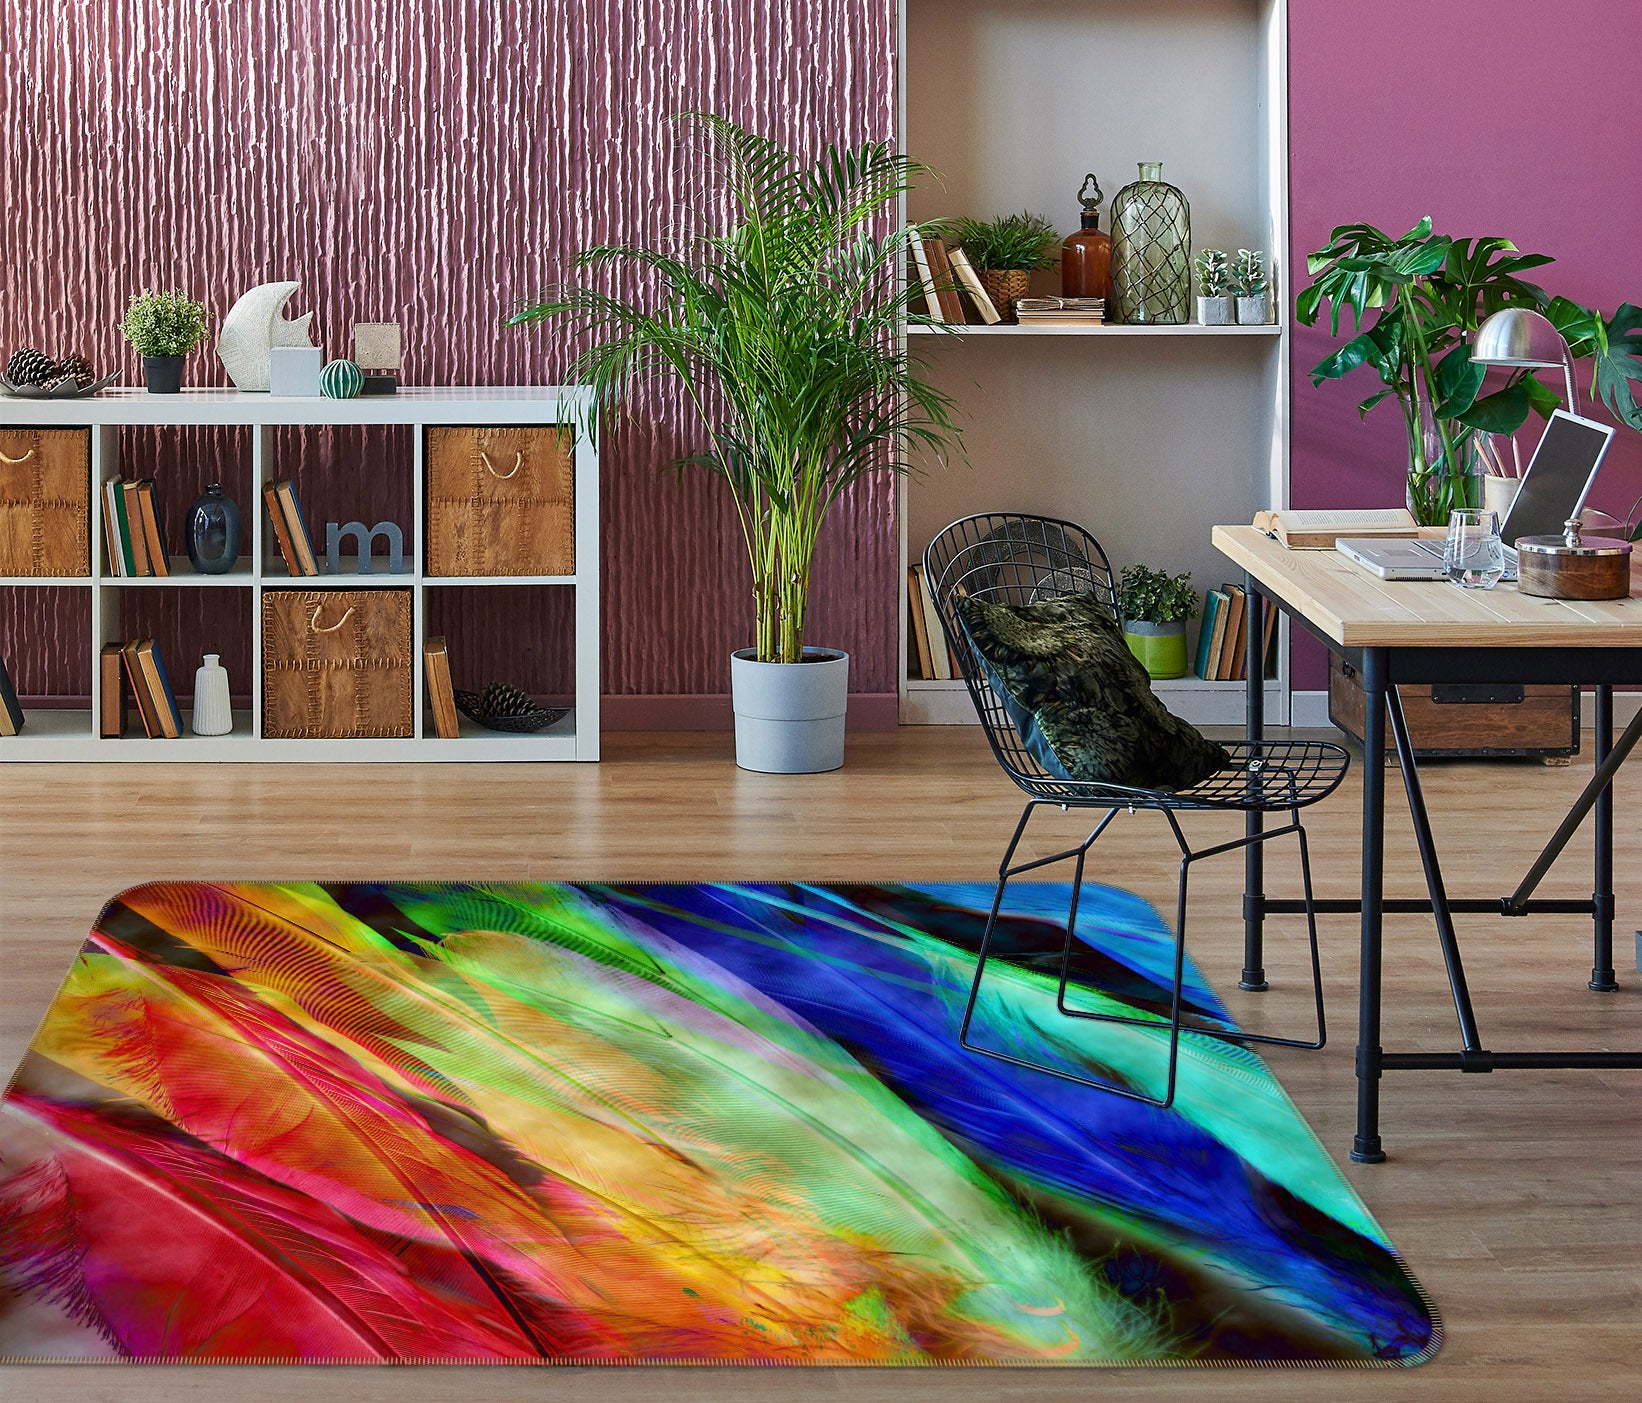 3D Colored Feathers 70041 Shandra Smith Rug Non Slip Rug Mat